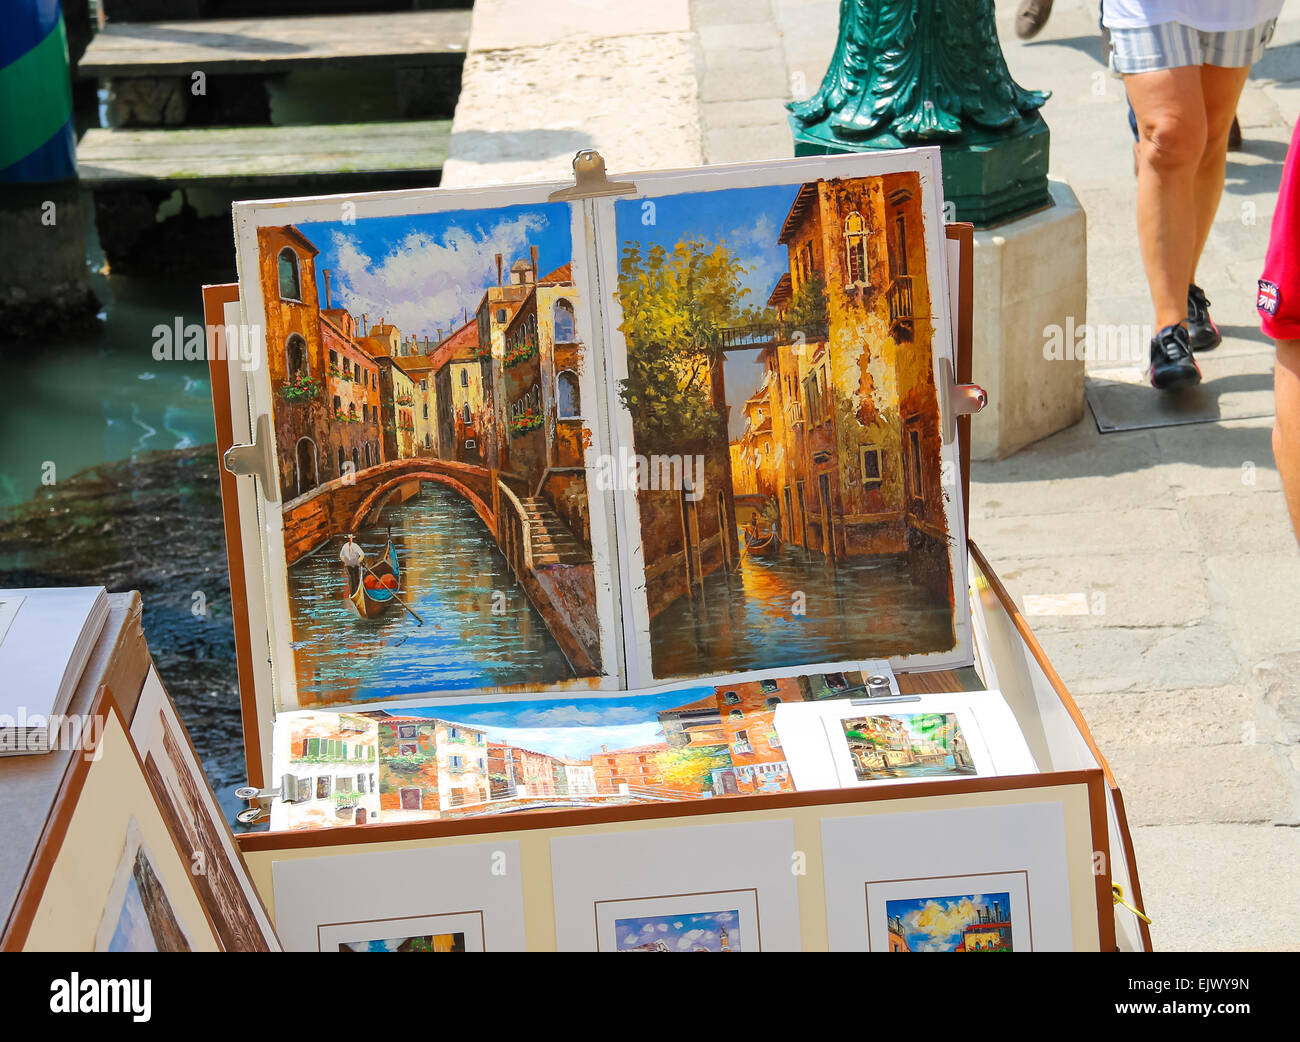 VENICE, ITALY - MAY 06, 2014: Equipment and drawings street artist in Venice, Italy Stock Photo